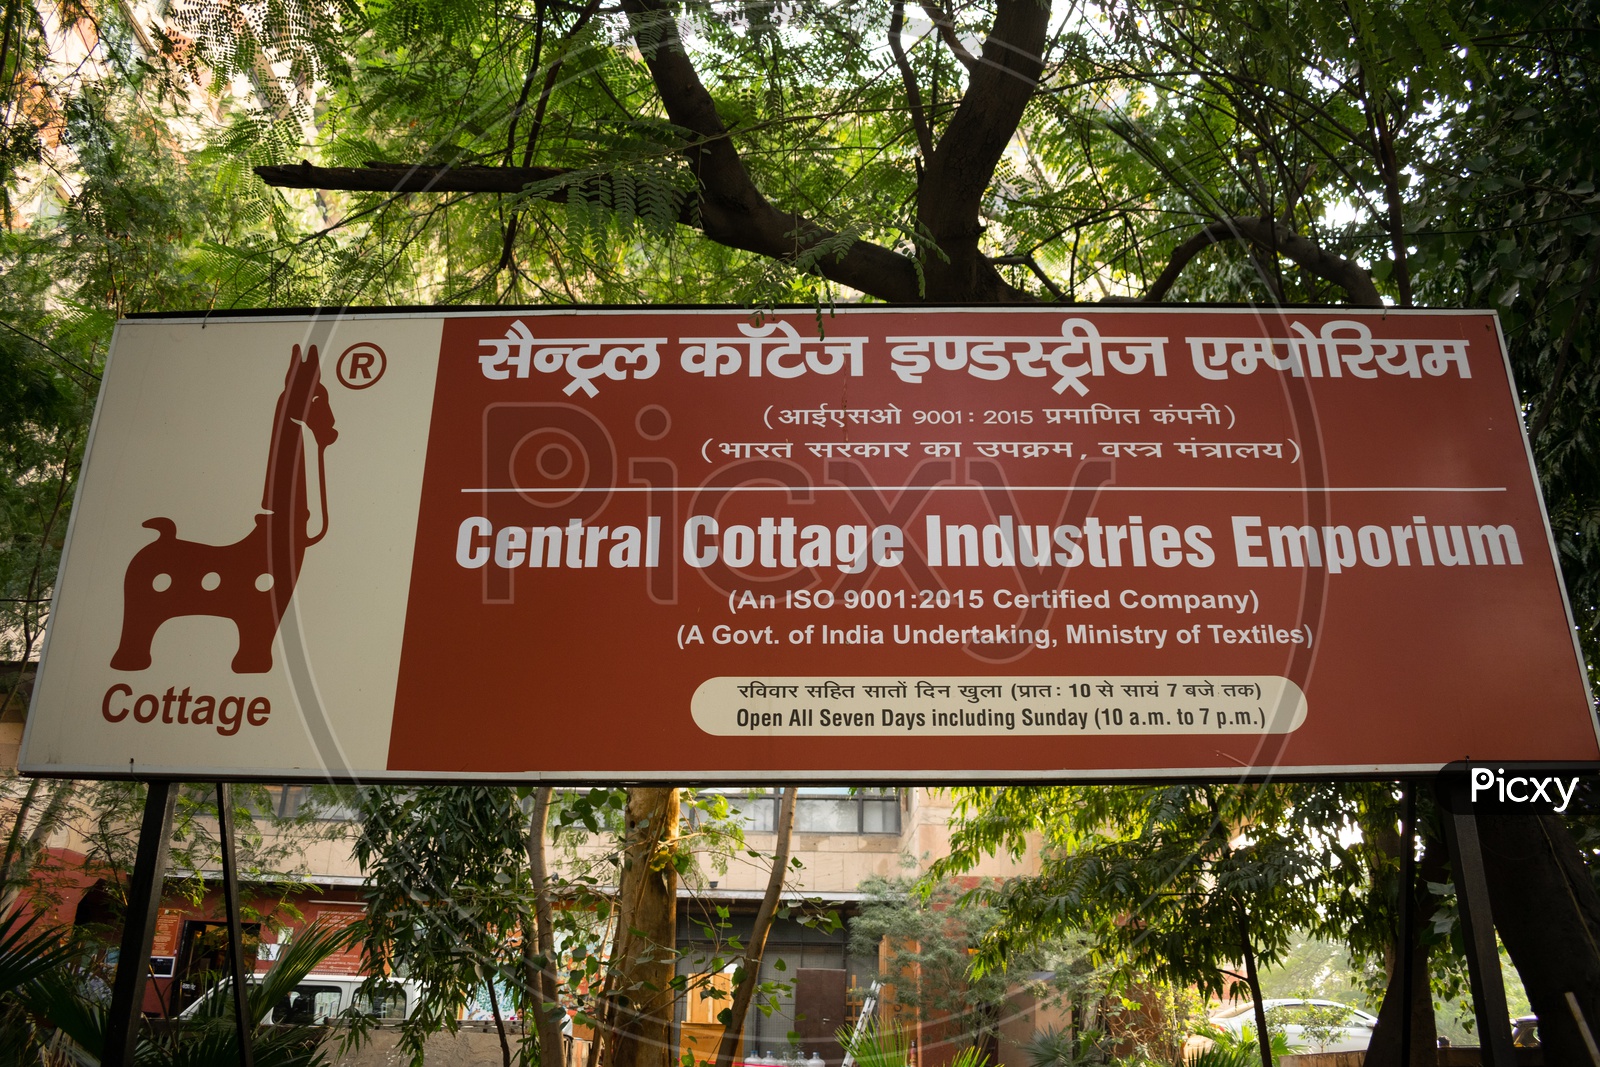 Central Cottage Industries Emporium sign board and it's logo